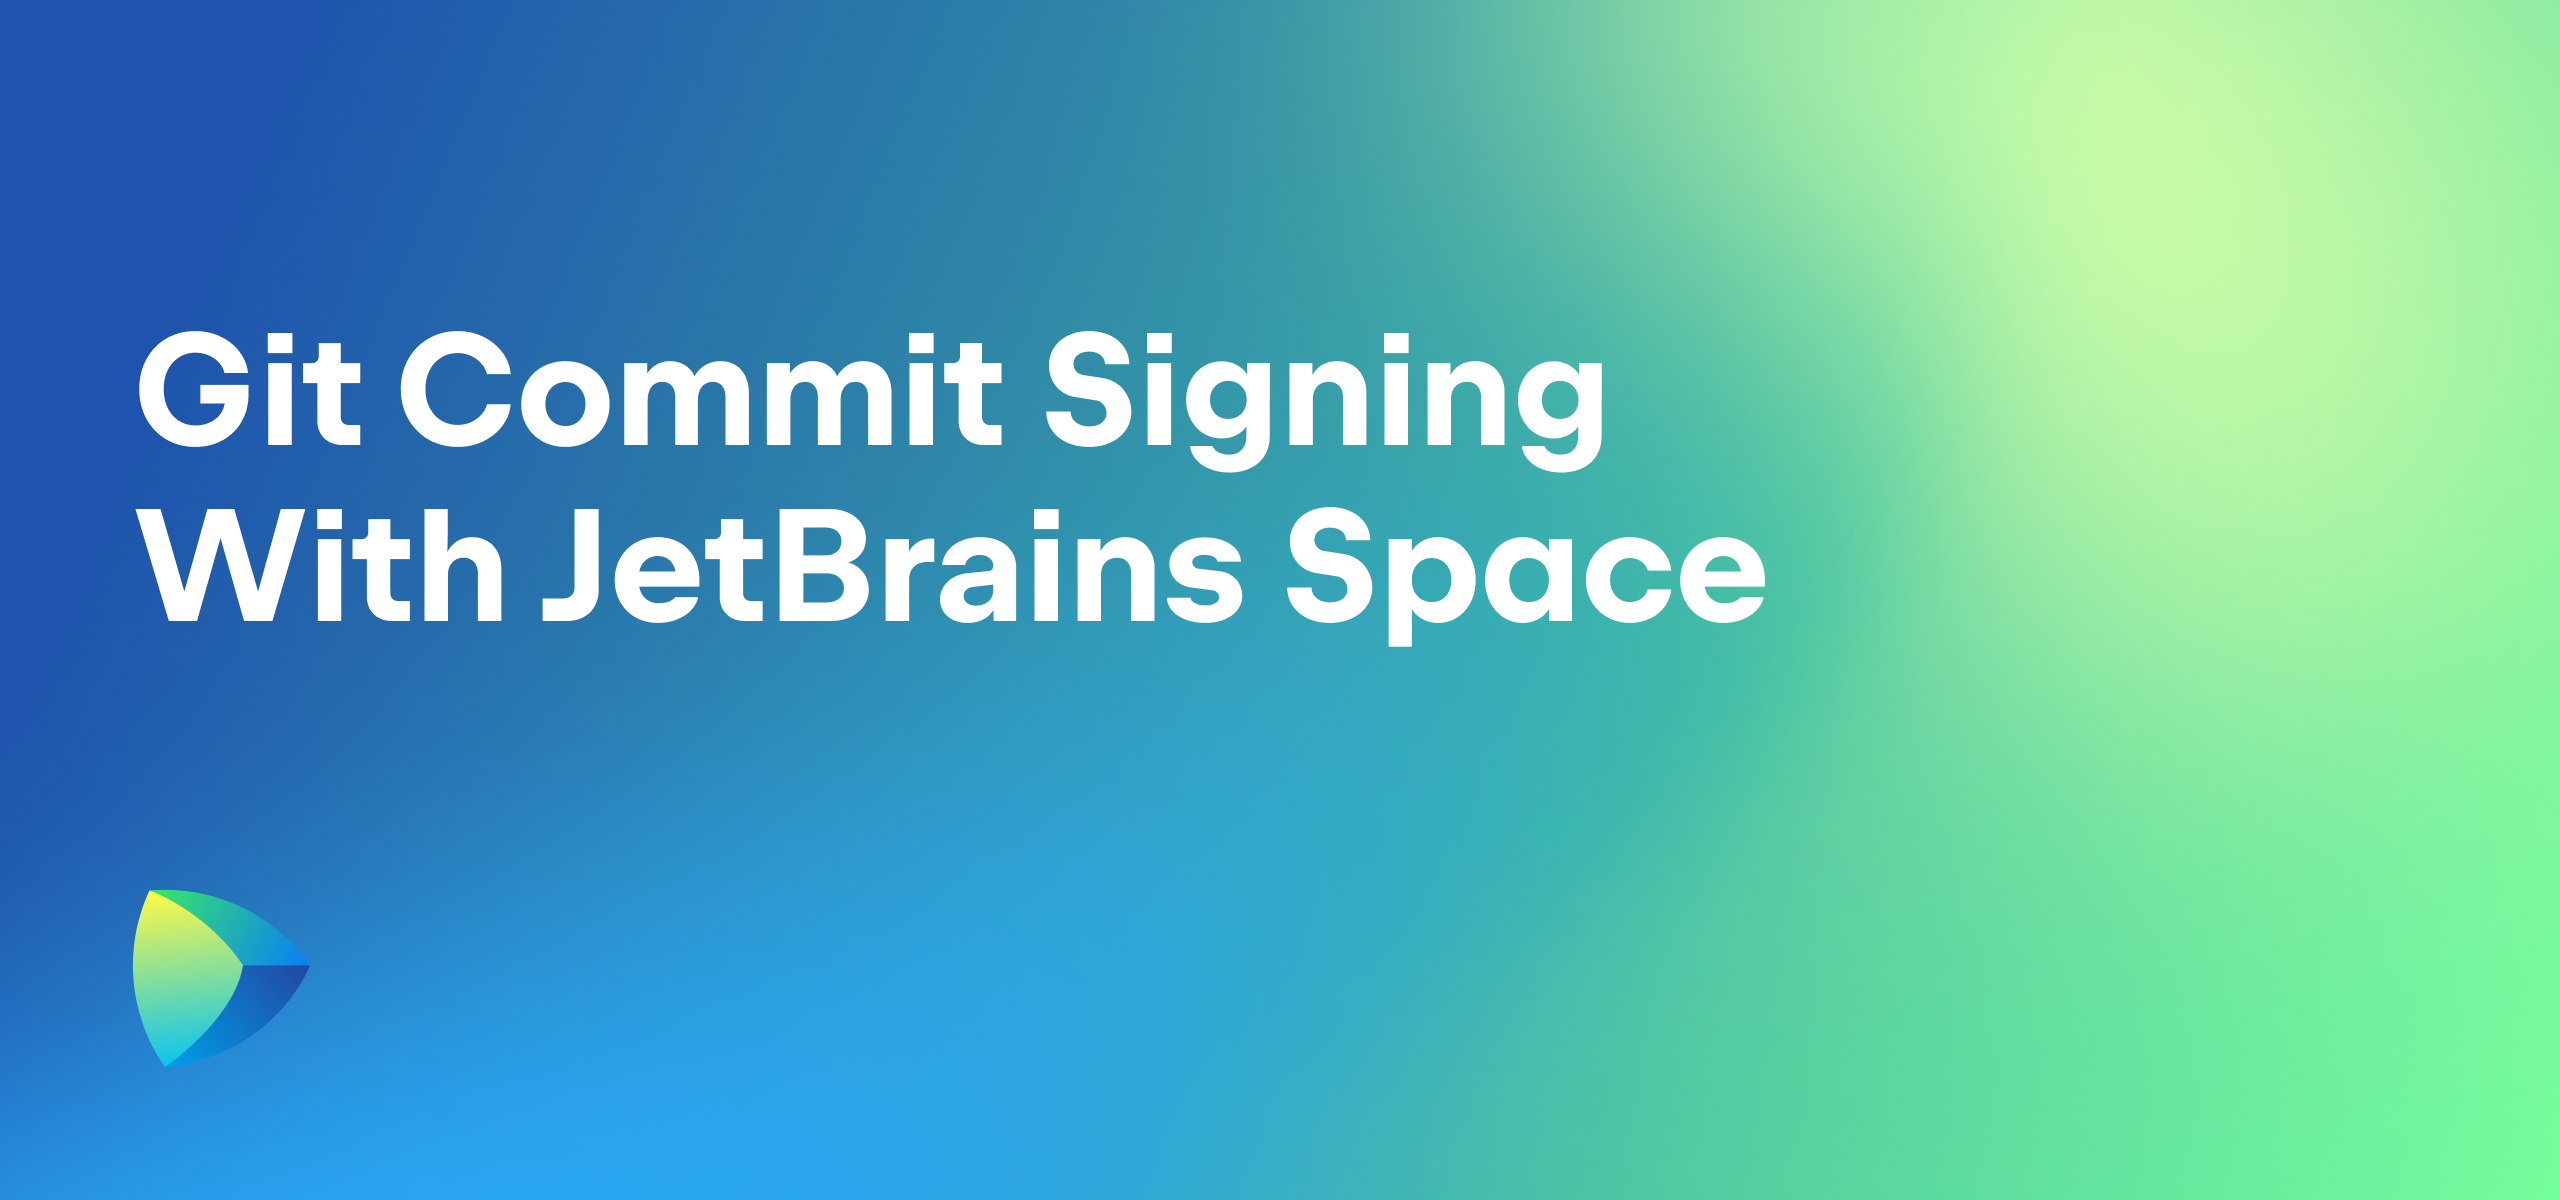 How to sign commits with JetBrains Space